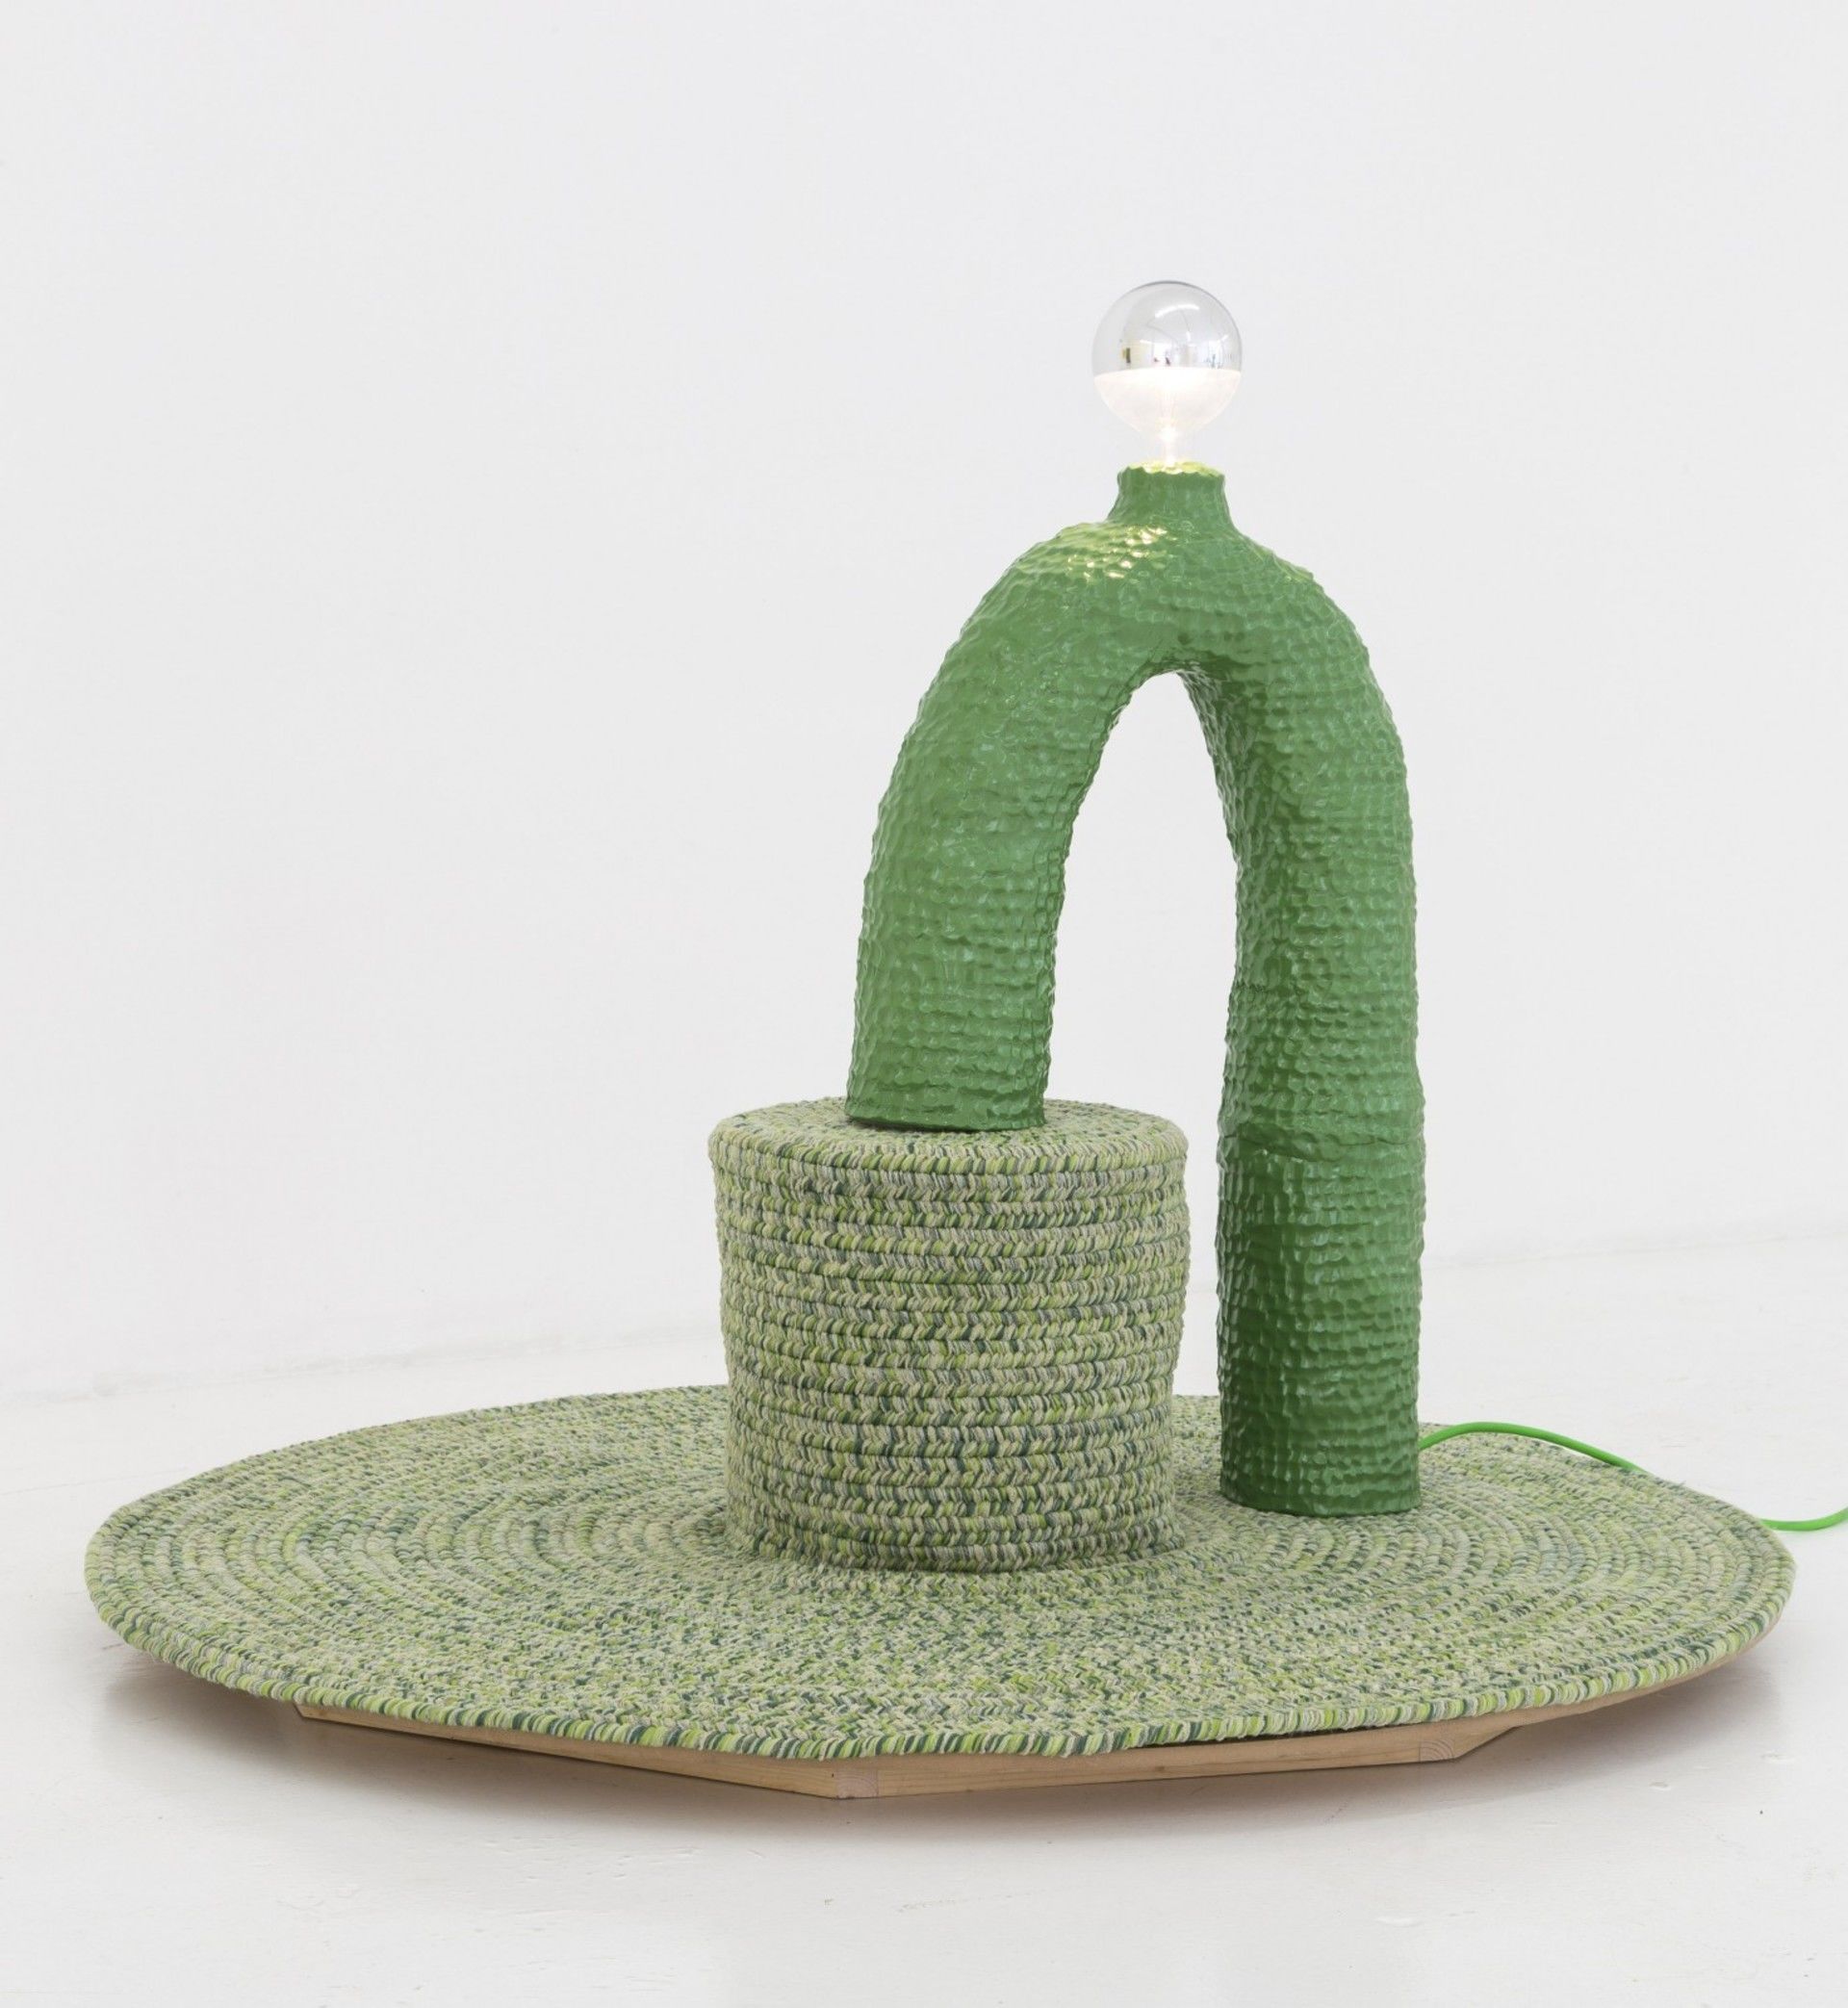 Green Rug Lamp by Katie Stout for exhibition Docile/Domicile/Dandy at Gallery Diet, Miami 2015